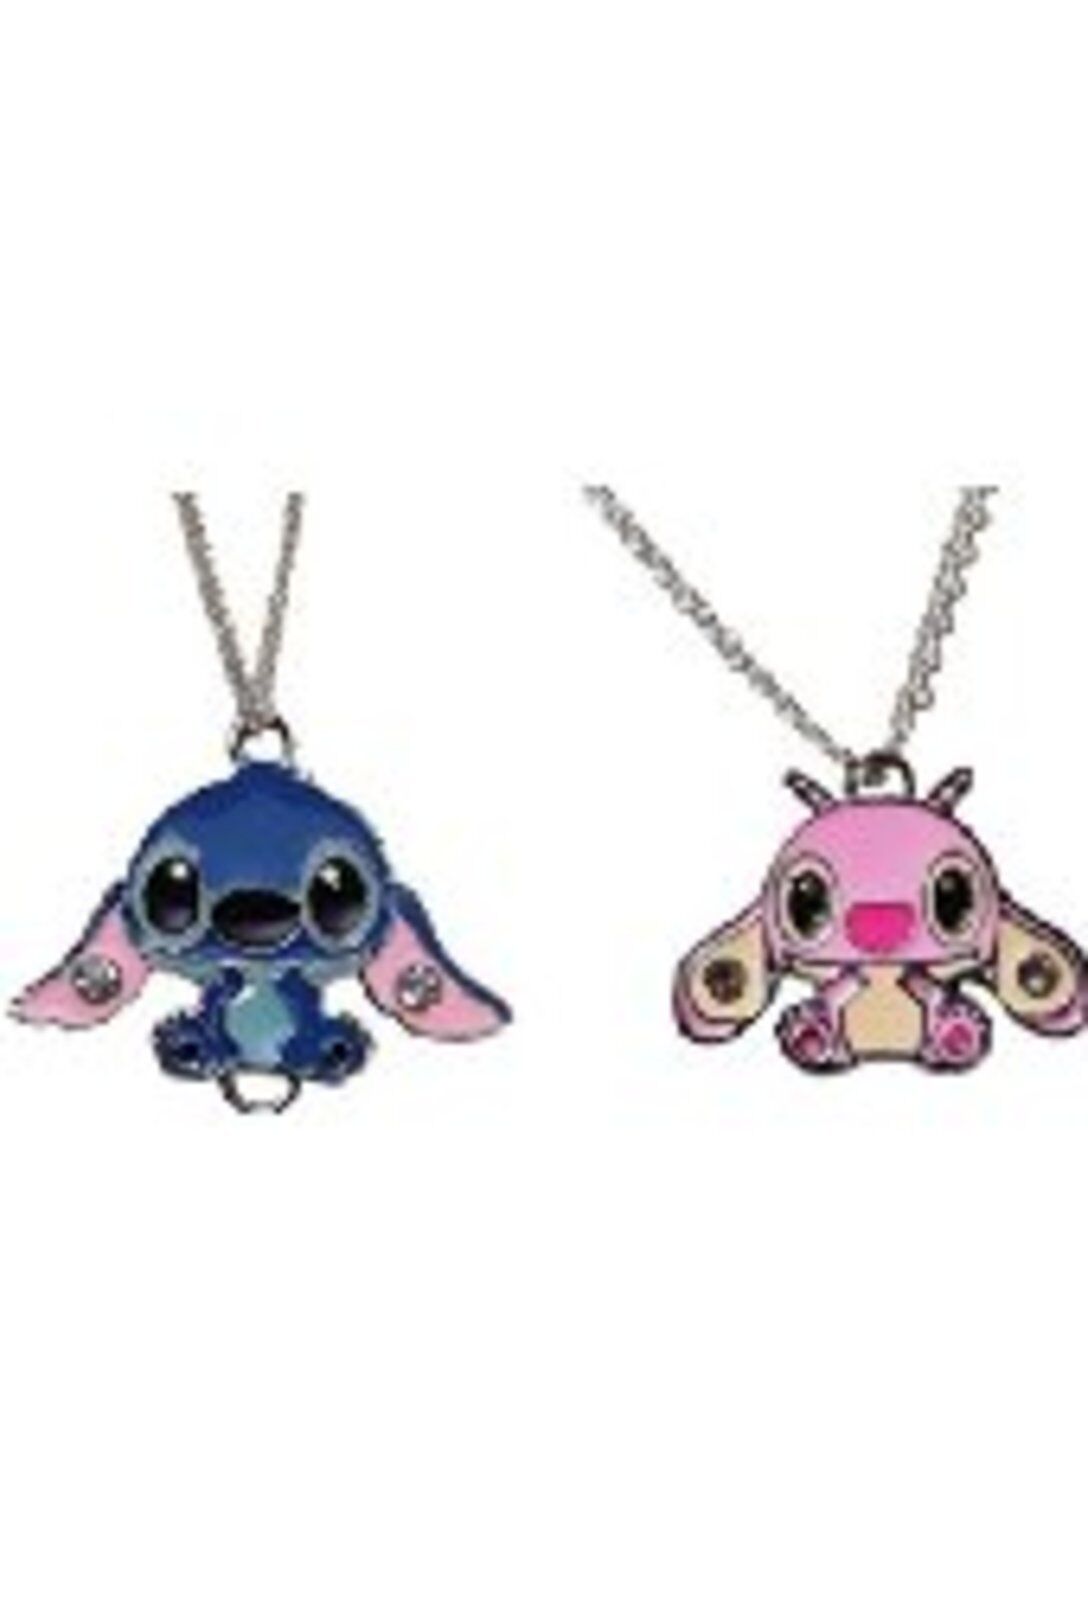 Disney Stitch Charms Necklace 2pcs Big Sis Little Sis Heart - Inspire Uplift